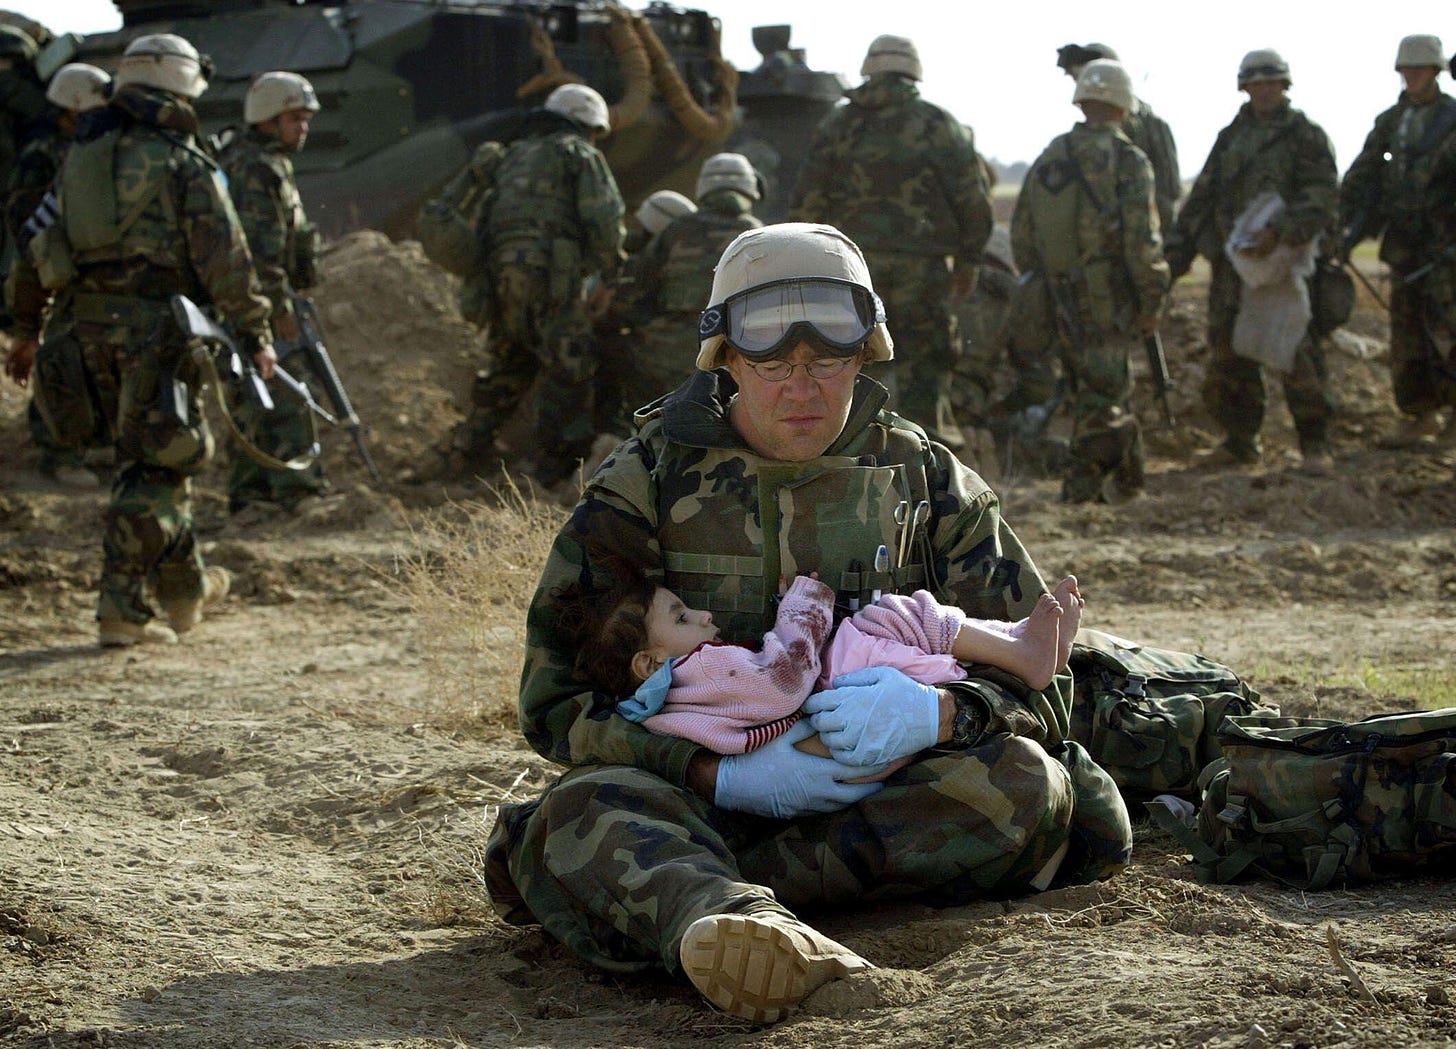 2D3XN9W A U.S. marine doctor holds an Iraqi girl in central Iraq March 29, 2003. Confused front line crossfire ripped apart an Iraqi family on Saturday after local soldiers appeared to force civilians towards U.S. marines positions.